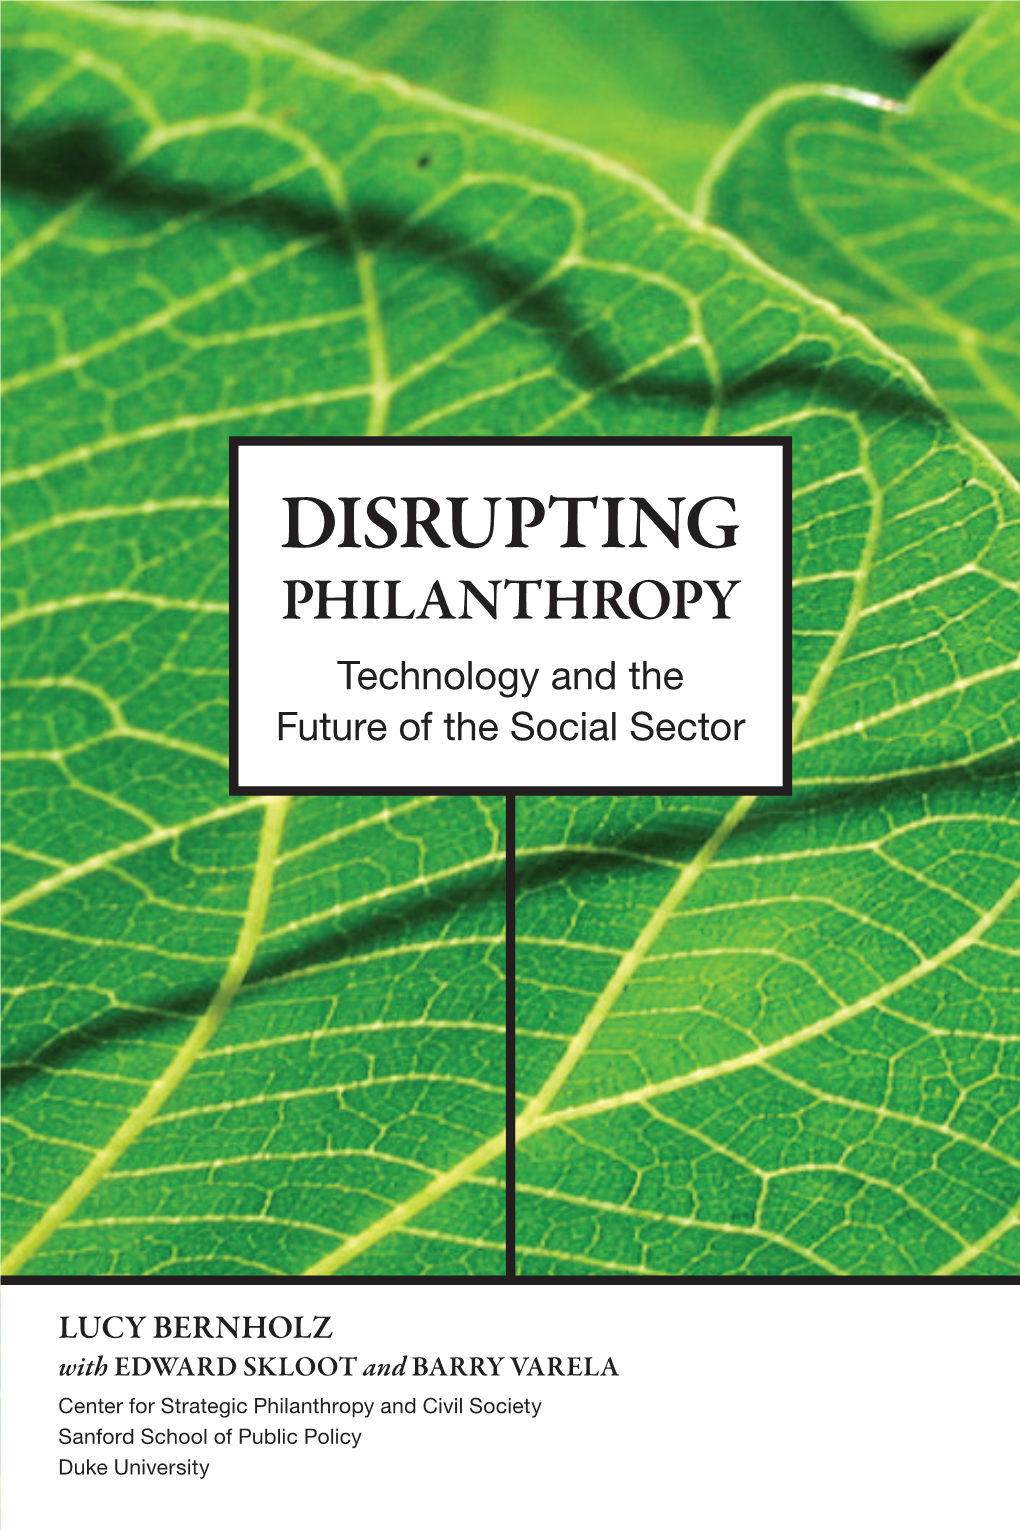 Disrupting Philanthropy Technology and the Future of the Social Sector